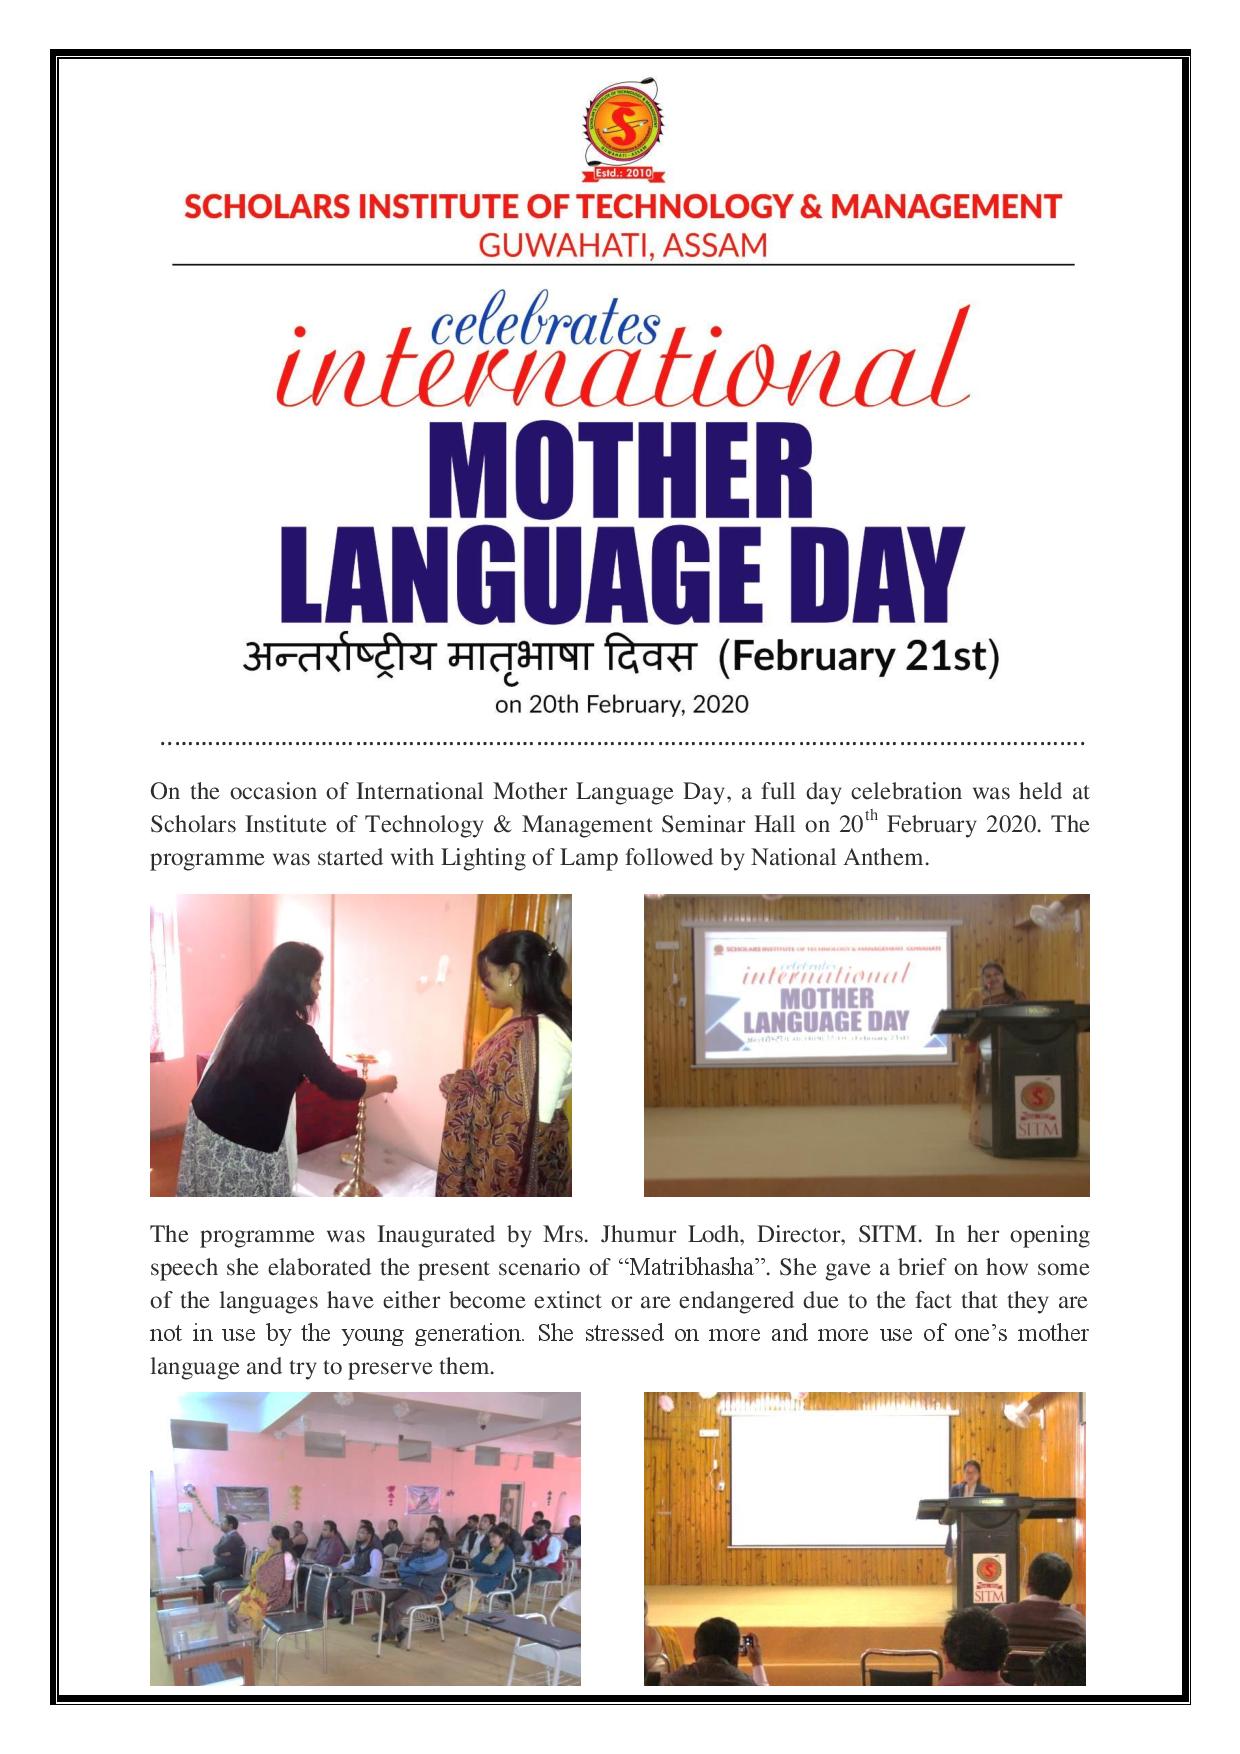 images/gallery/events/International Mother Language Day 2020/Report-page-001.jpg